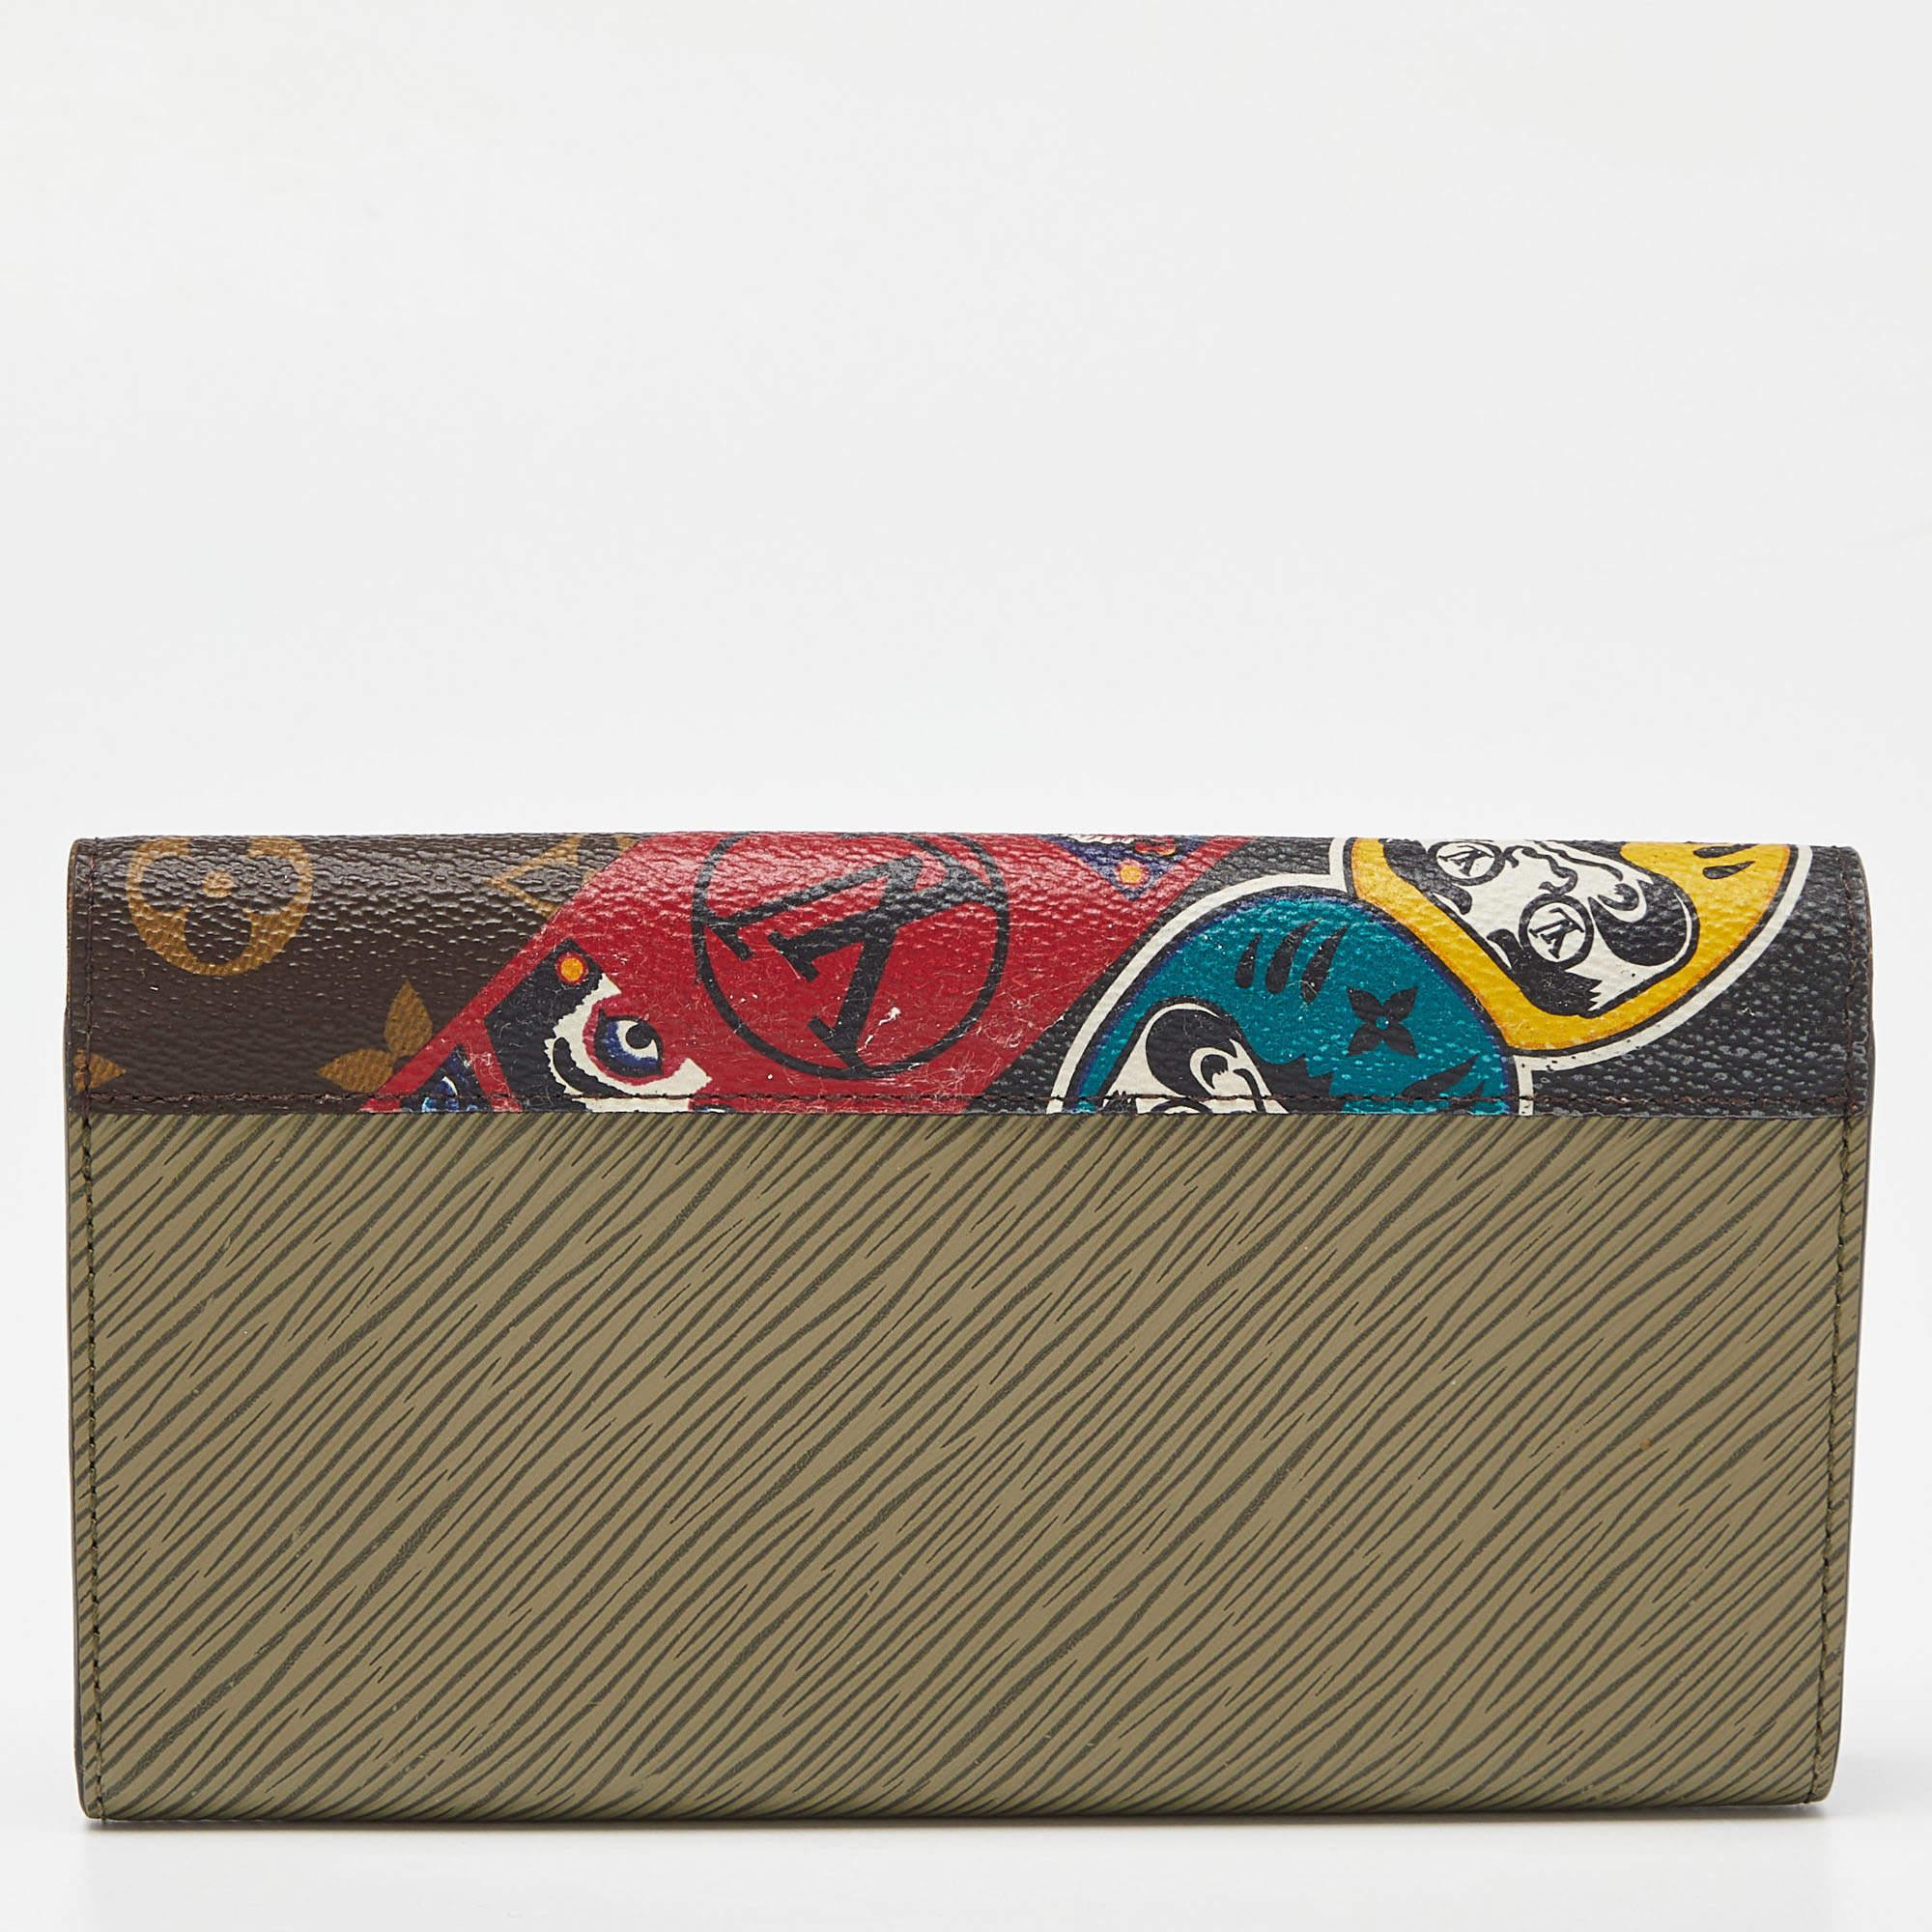 Elevate your everyday elegance with this LV Twist wallet. Meticulously crafted from premium materials, it seamlessly blends style, functionality, and sophistication, making it the perfect accessory for the discerning fashion connoisseur.

Includes: